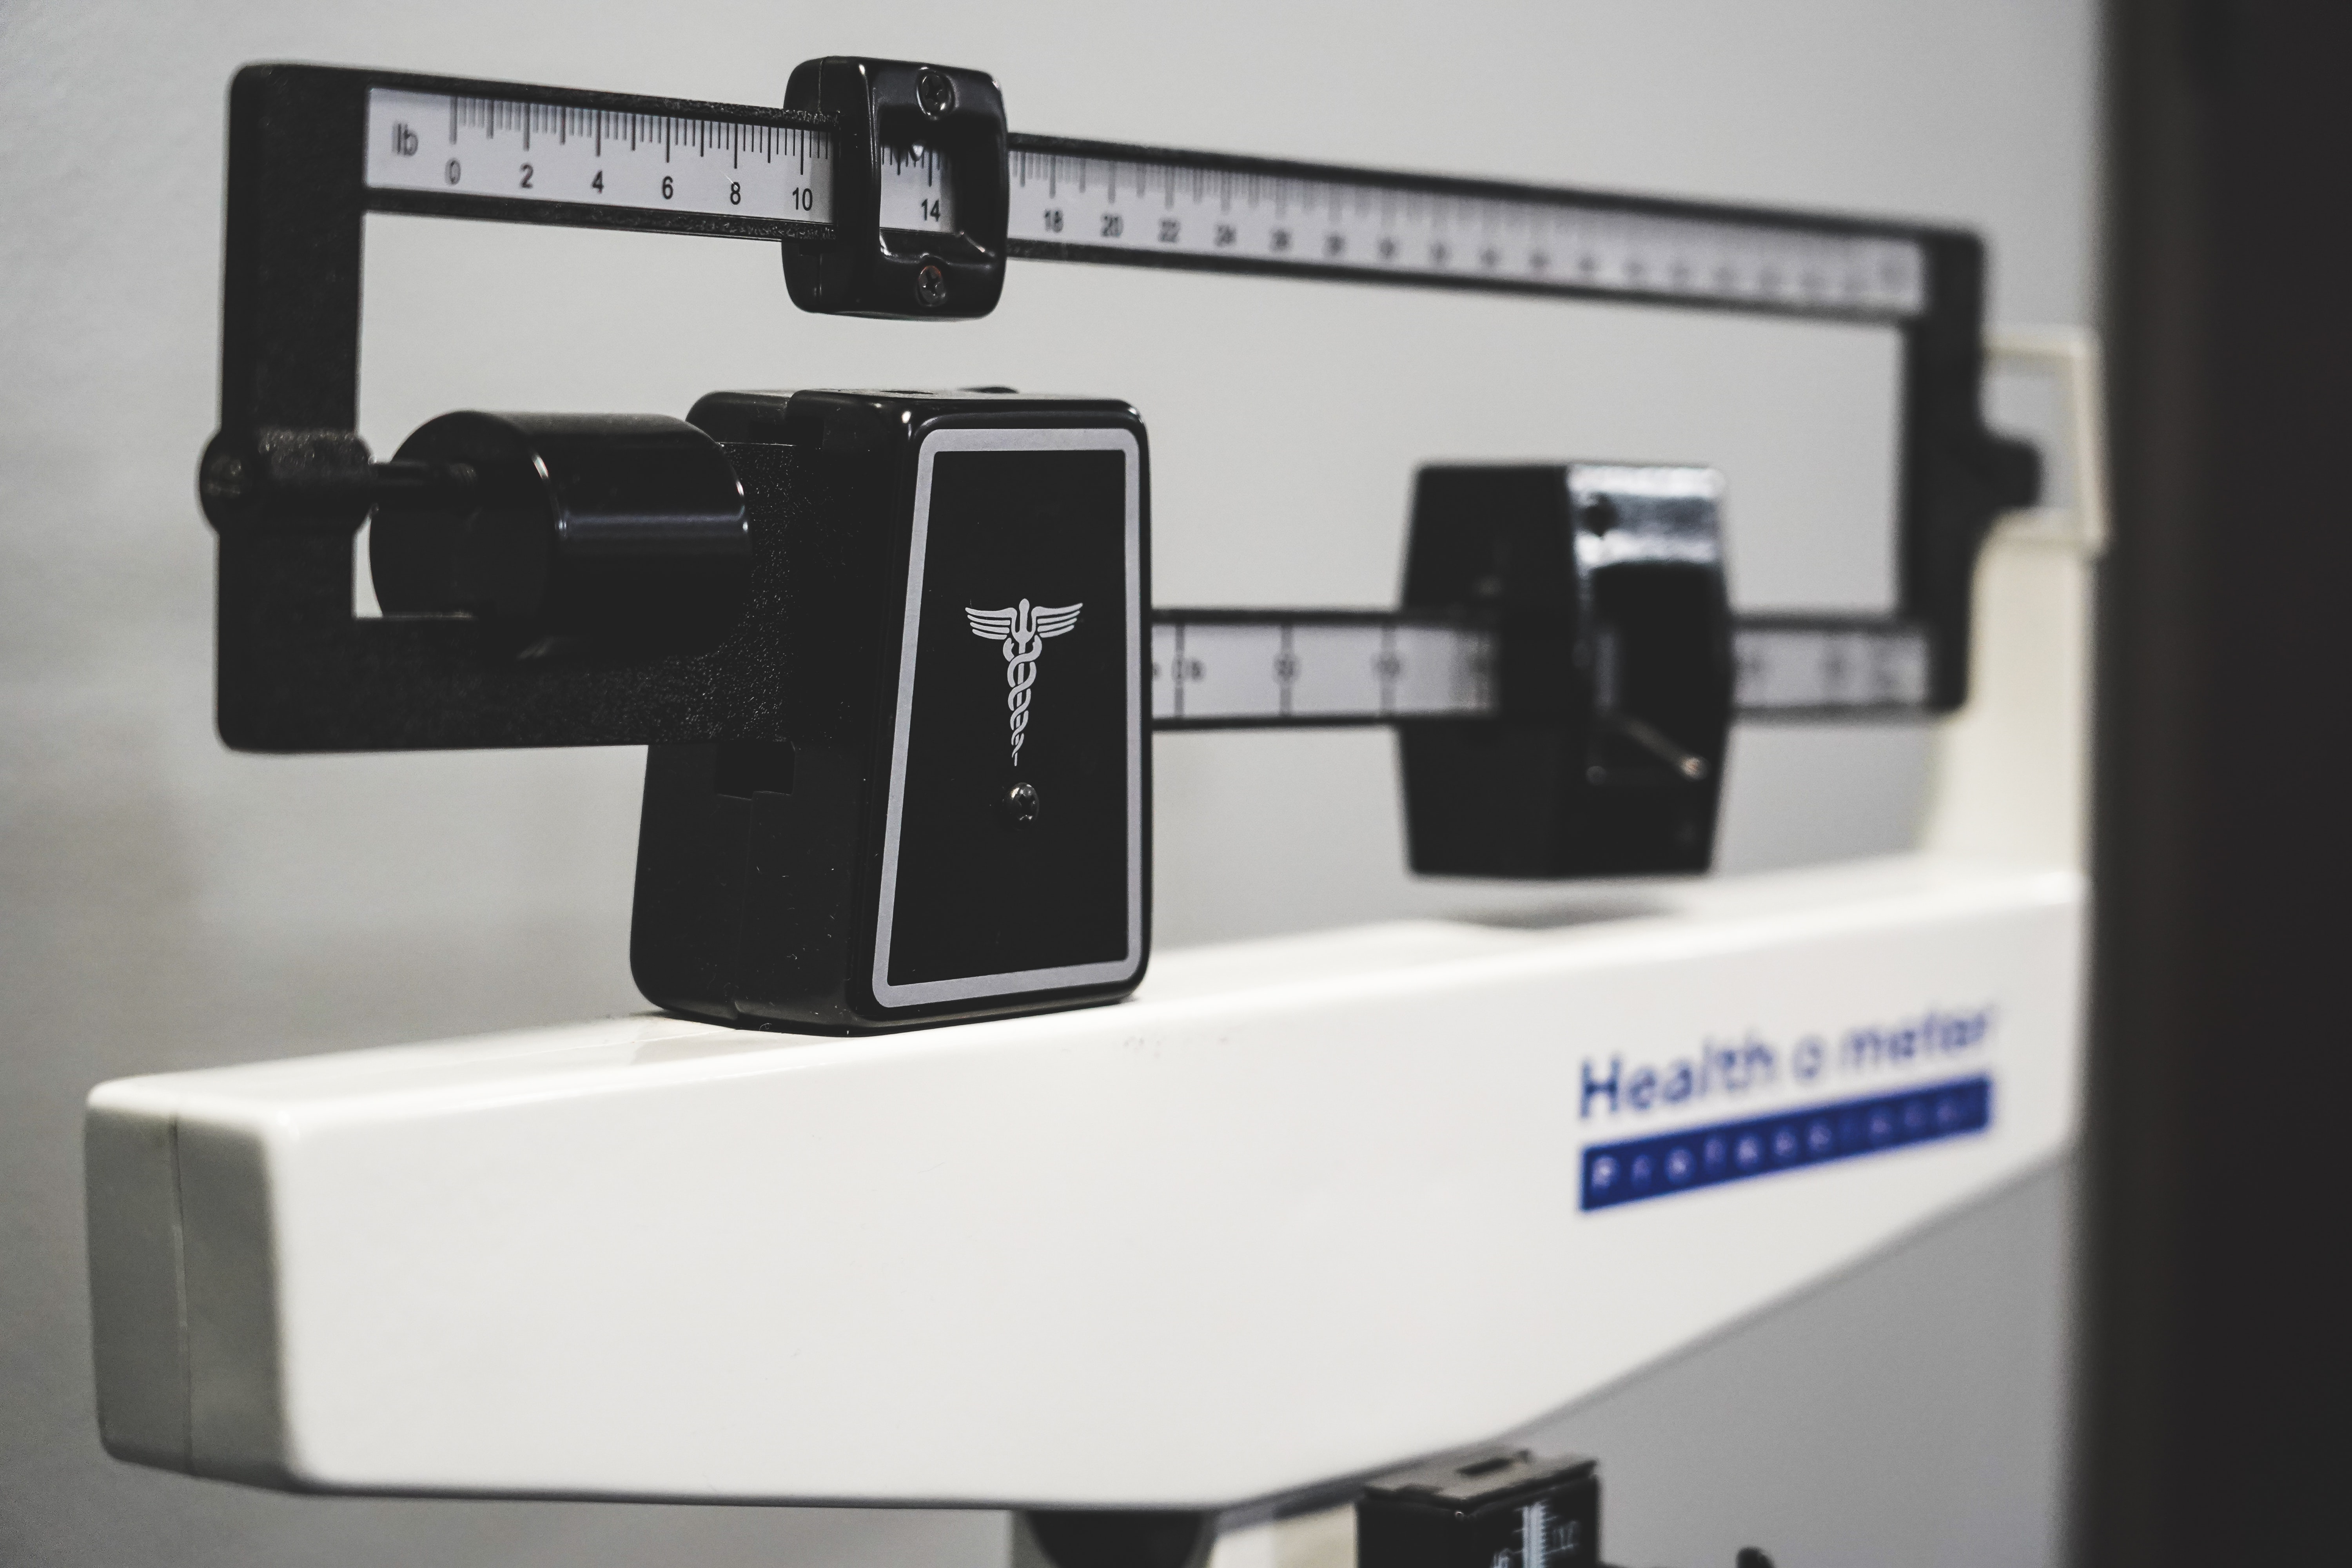 Ask an Equip Provider: What Do I Do if My Patient Says They Want to Lose Weight?